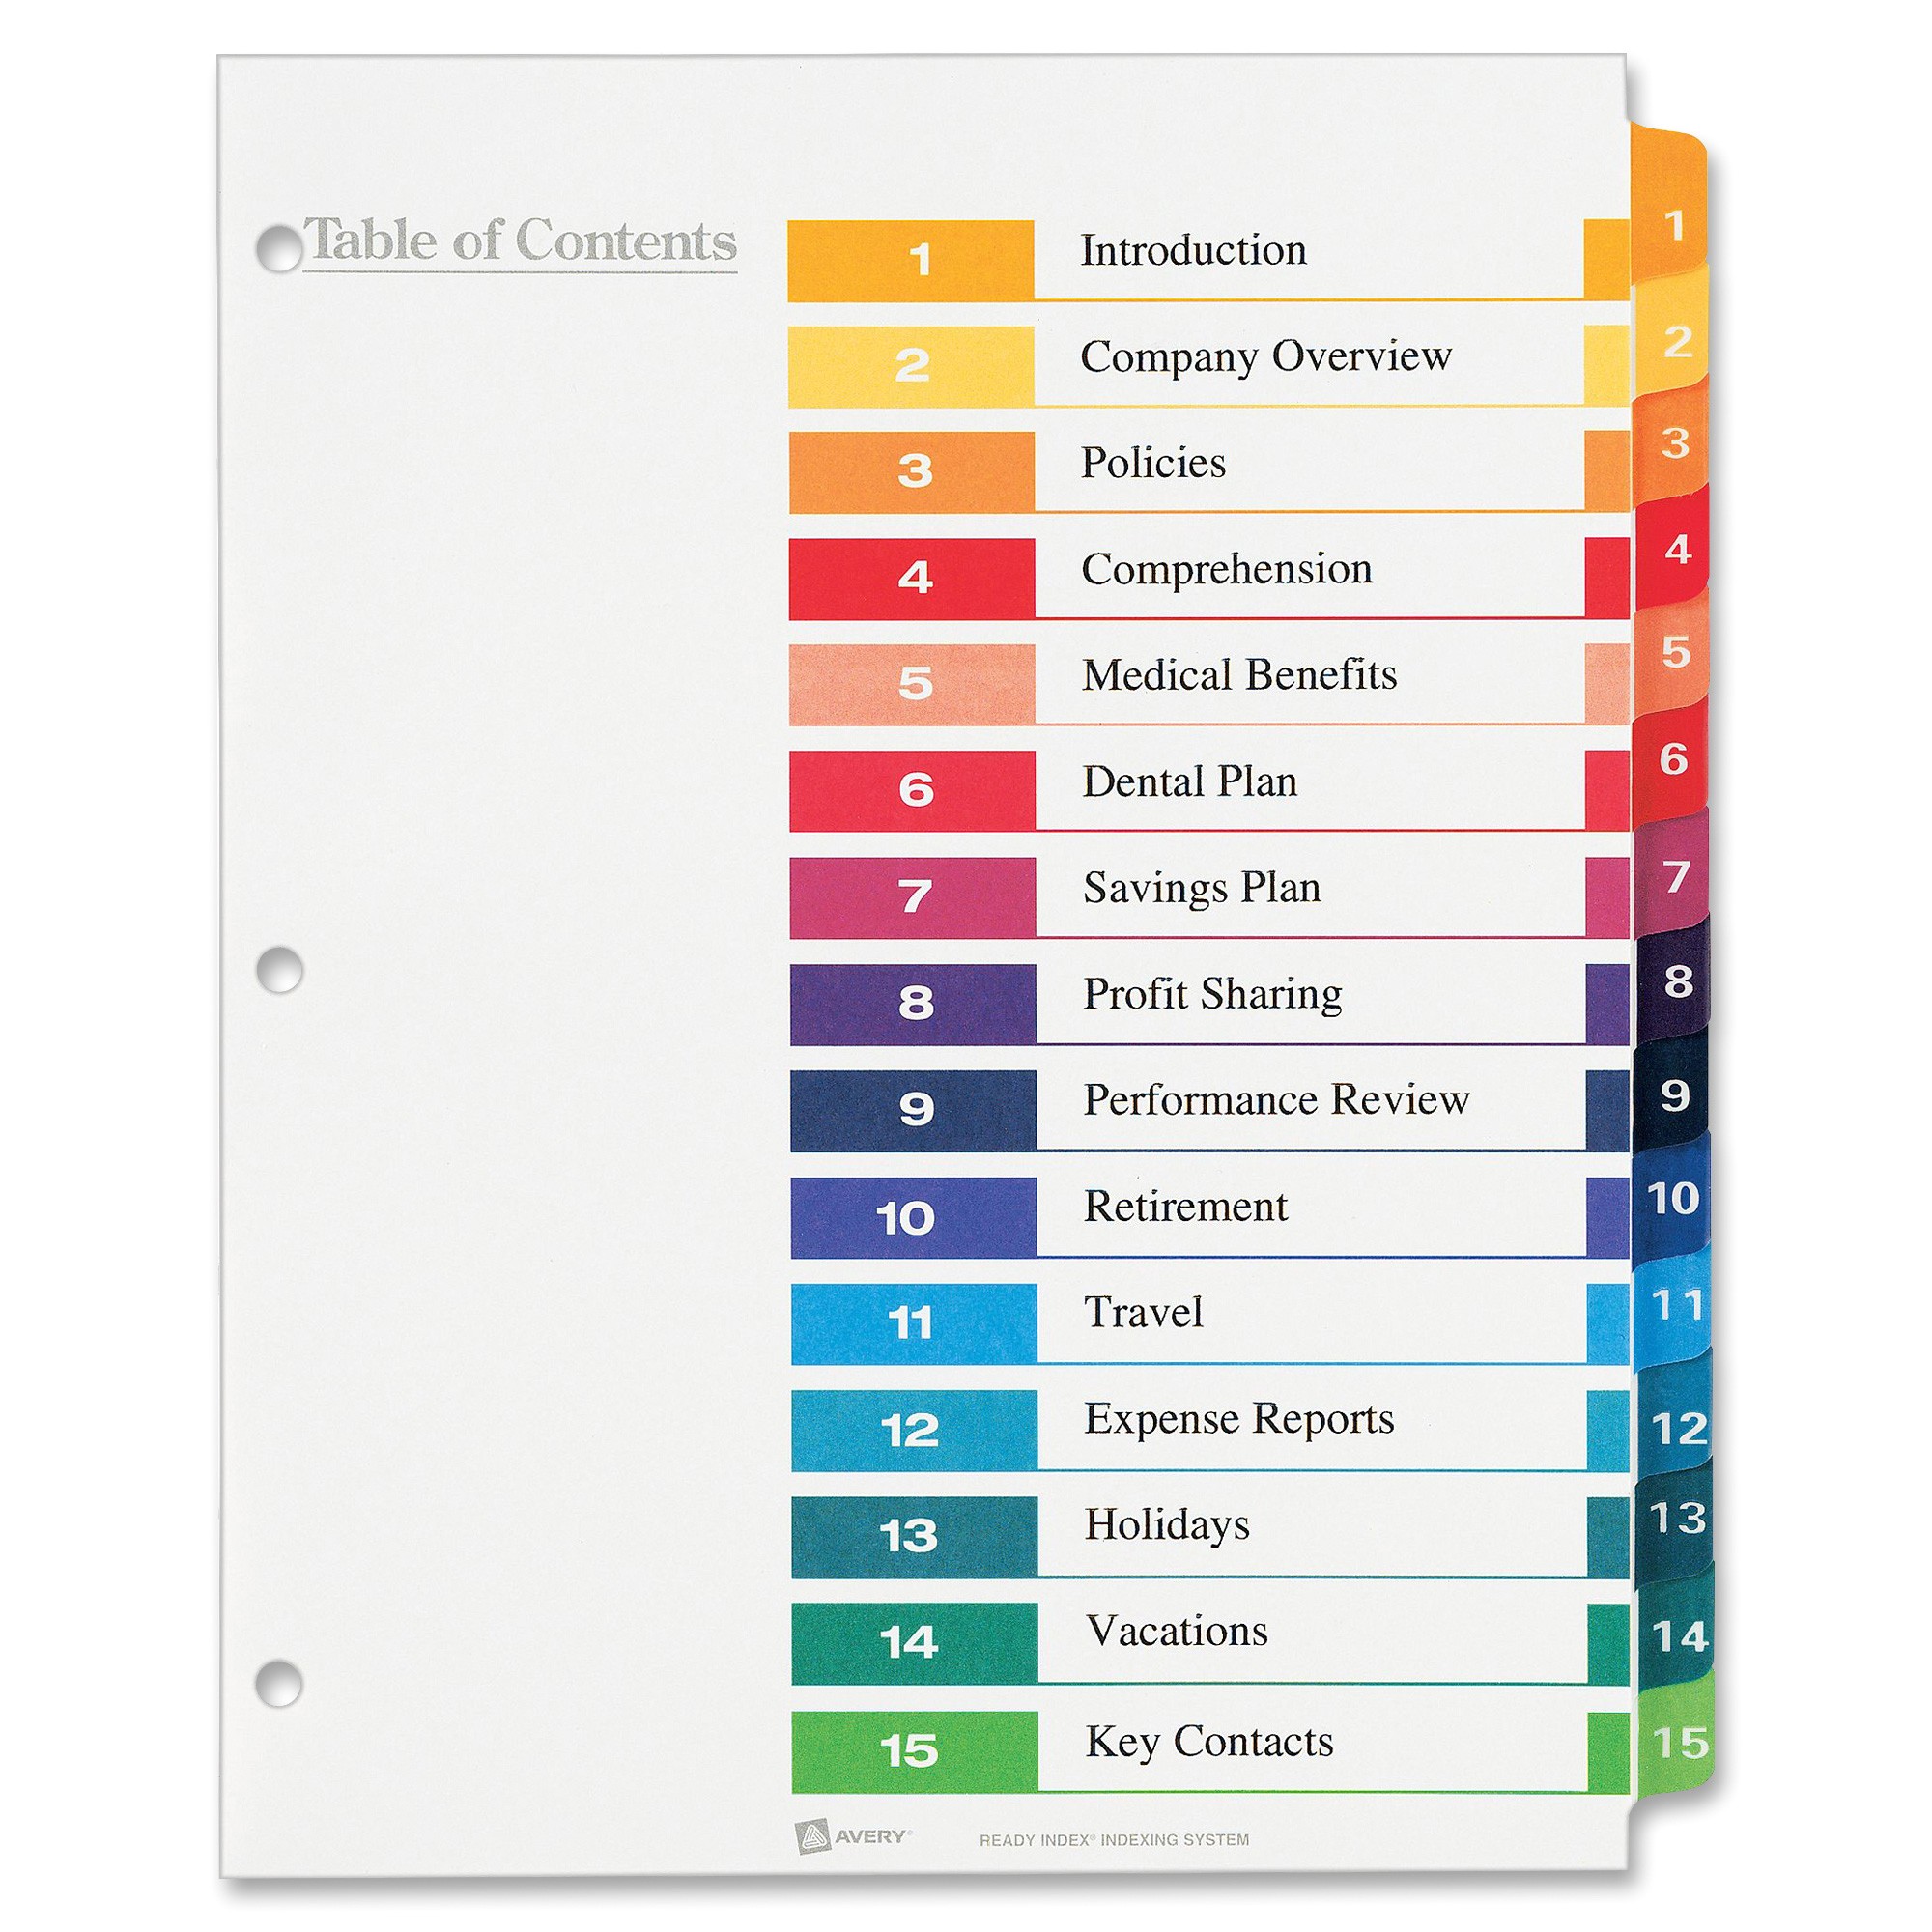 avery ready index customizable table of contents classic multicolor dividers ave11197